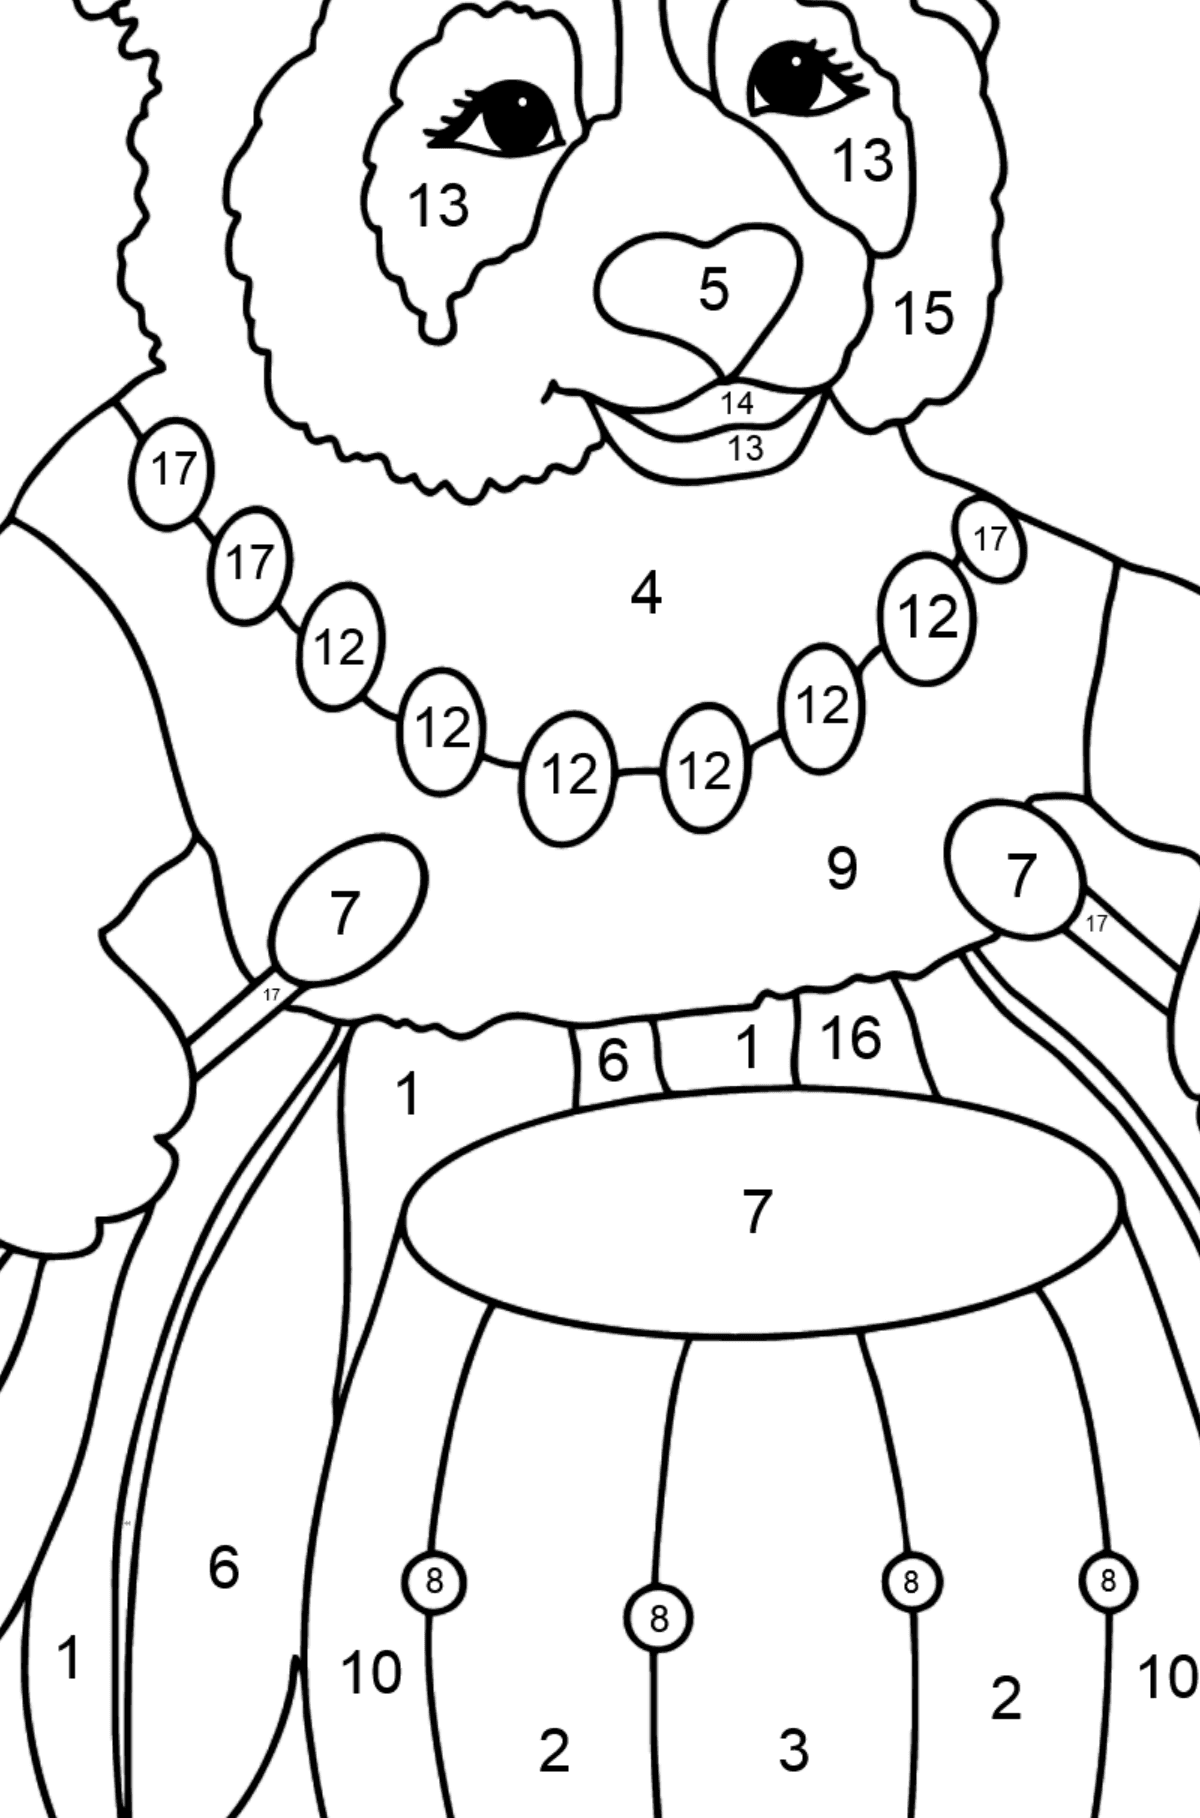 Coloring Picture - A Panda Drummer - Coloring by Numbers for Kids